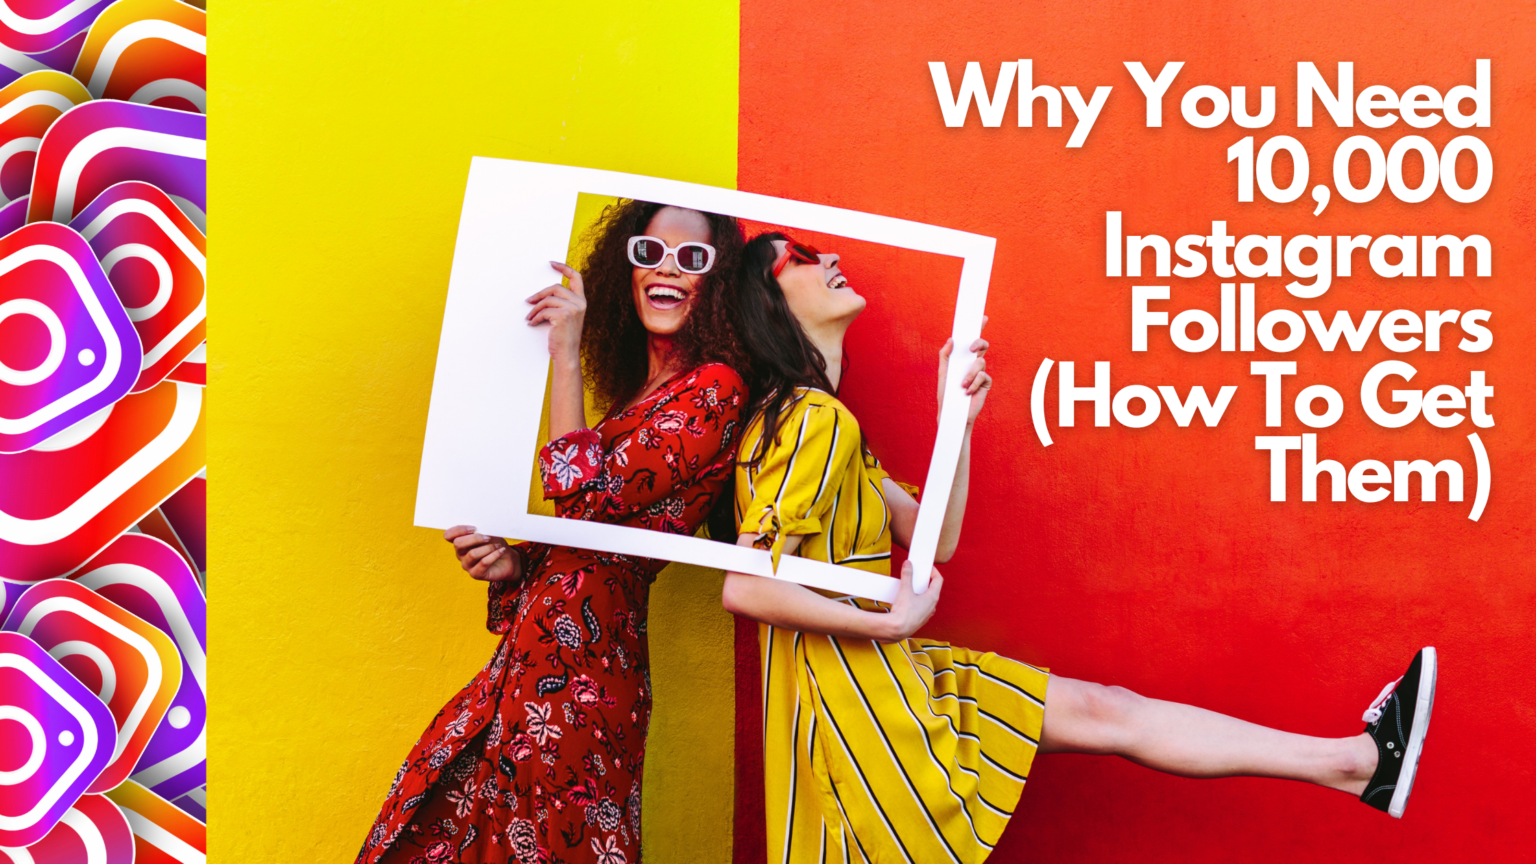 Why You Need 10,000 Instagram Followers (and How to Get Them) – MFG SEO